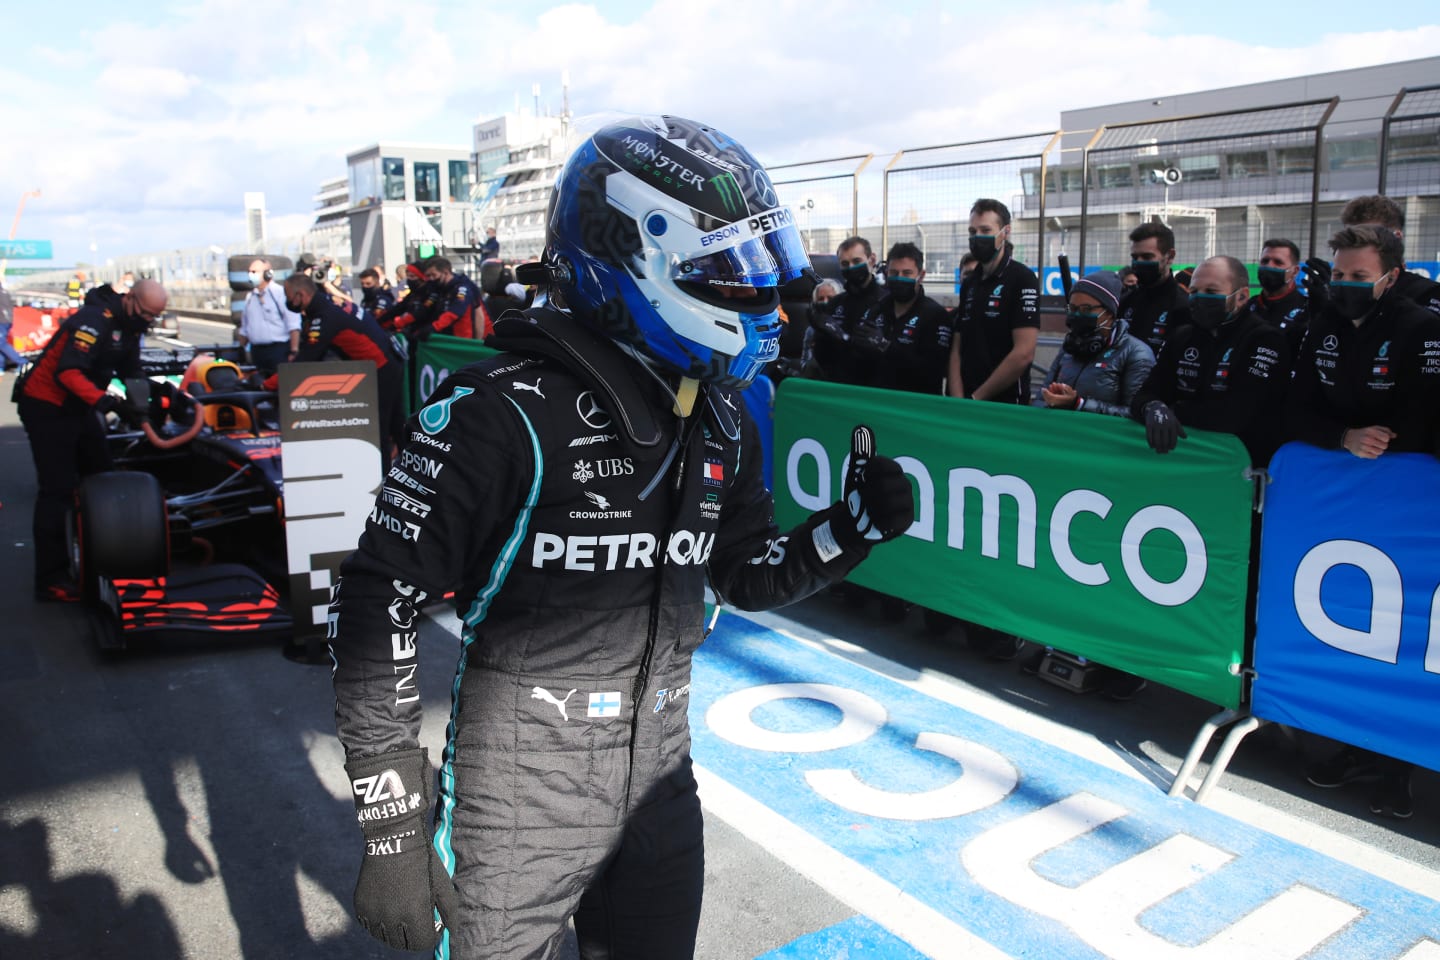 NUERBURG, GERMANY - OCTOBER 10: Pole position qualifier Valtteri Bottas of Finland and Mercedes GP celebrates in parc ferme during qualifying ahead of the F1 Eifel Grand Prix at Nuerburgring on October 10, 2020 in Nuerburg, Germany. (Photo by Wolfgang Rattay - Pool/Getty Images)